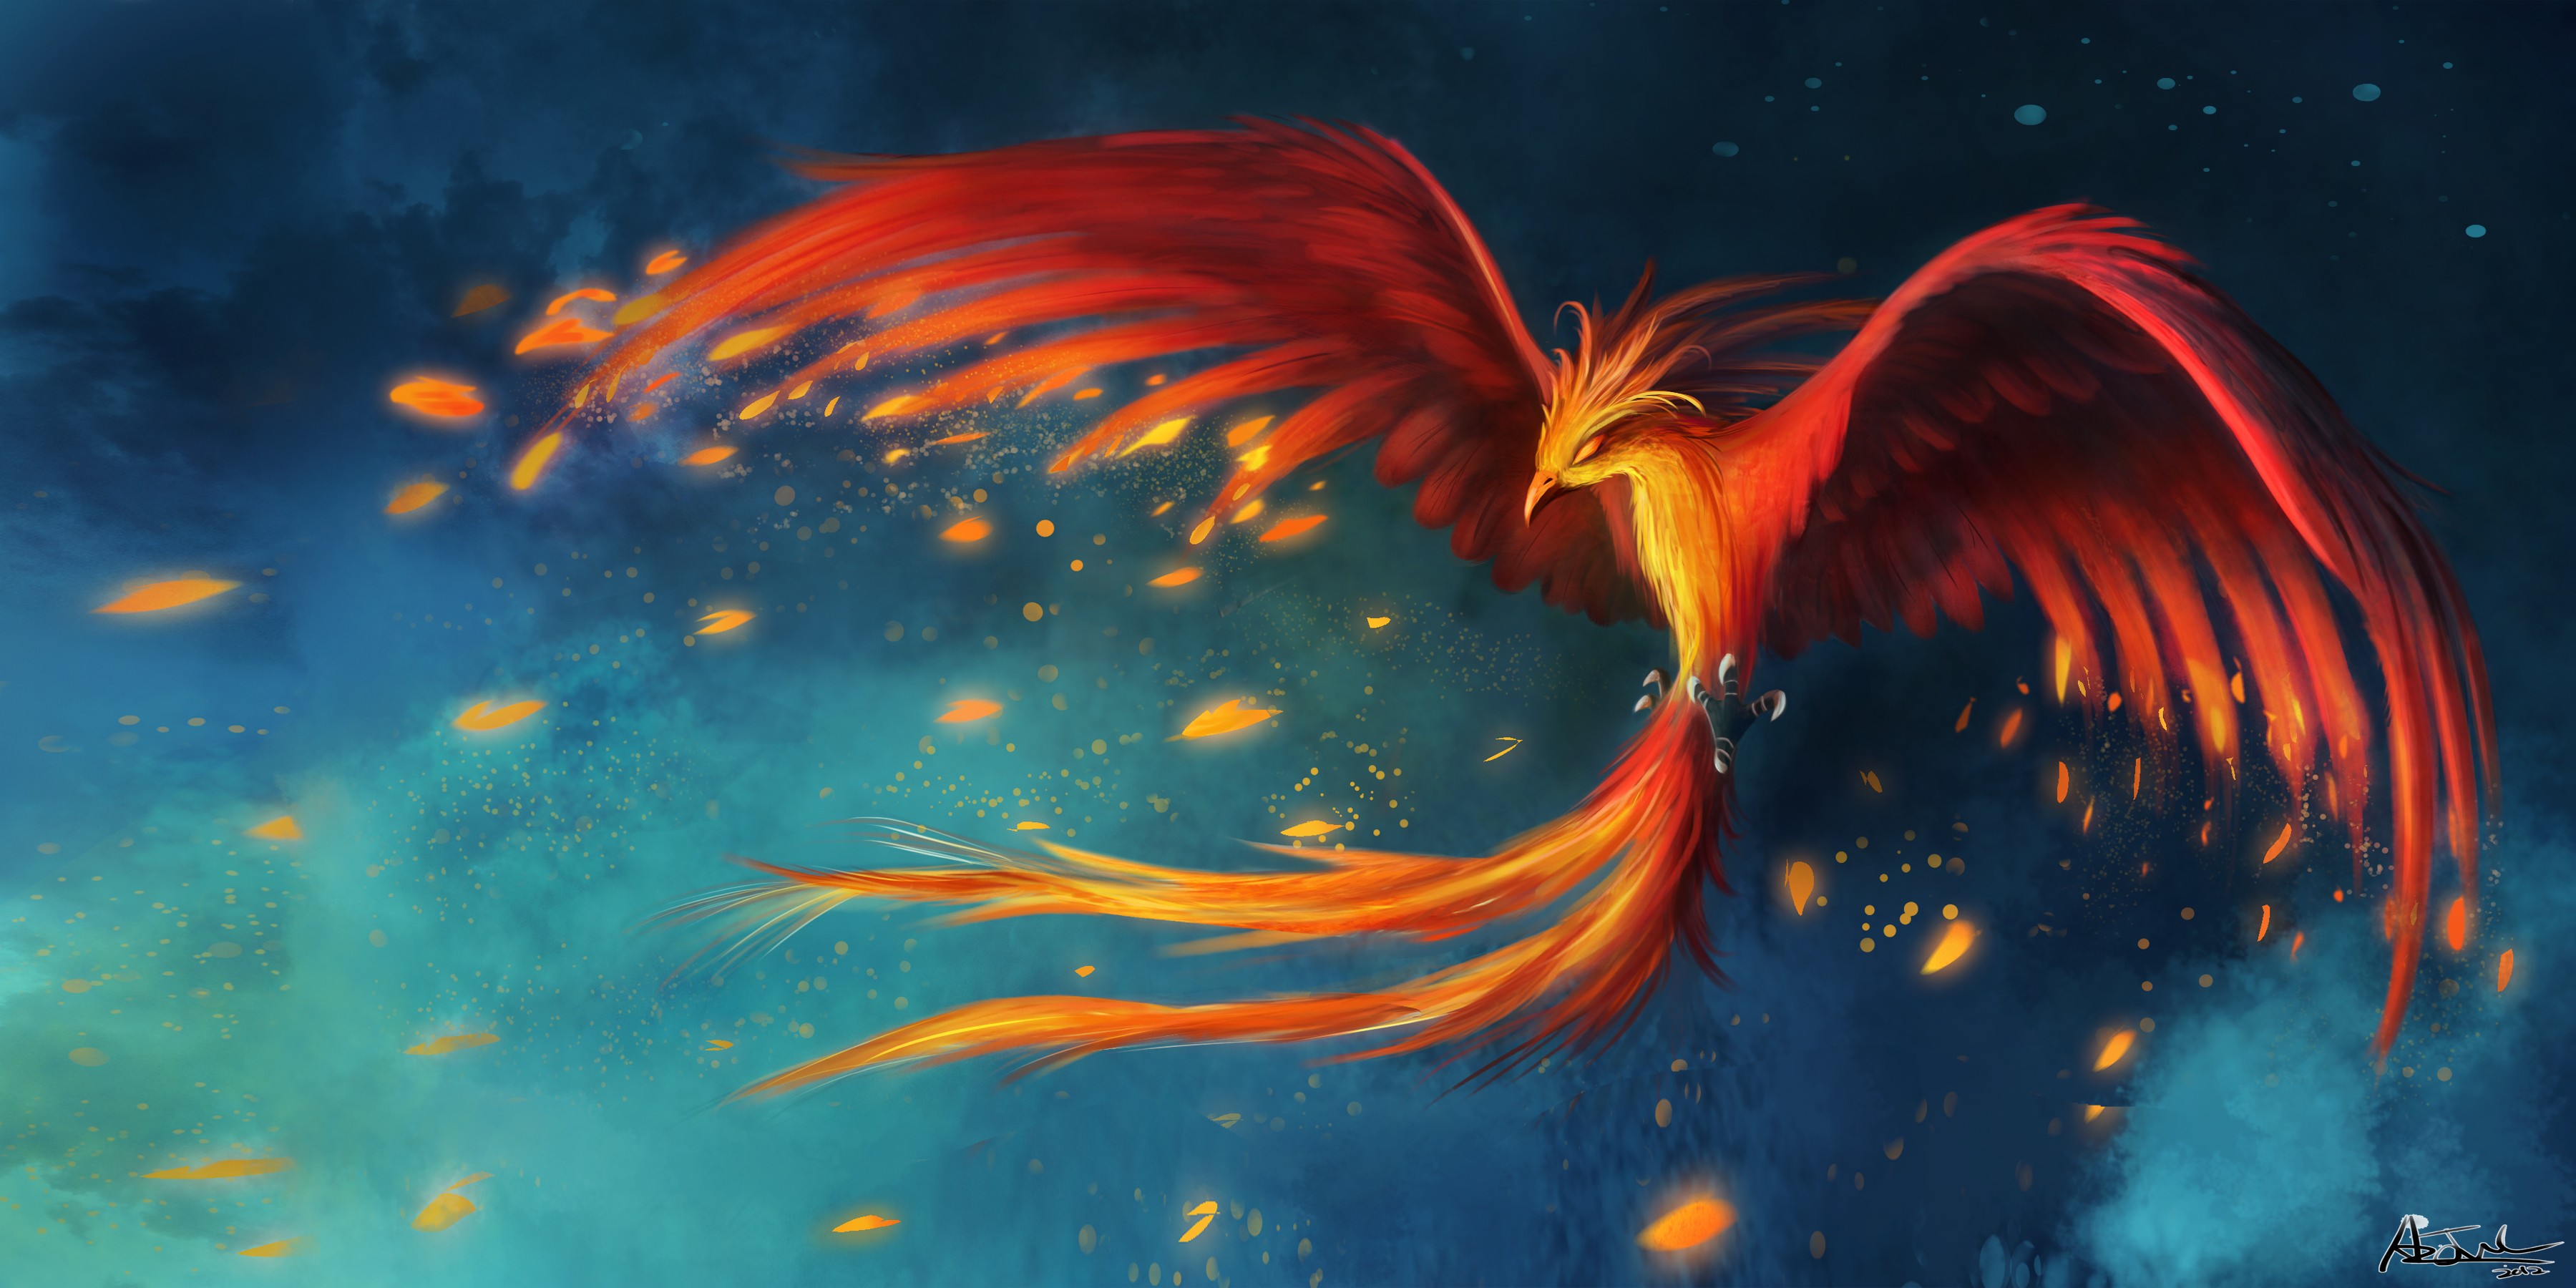 Phoenix Wallpaper Download Free Beautiful High Resolution Images, Photos, Reviews